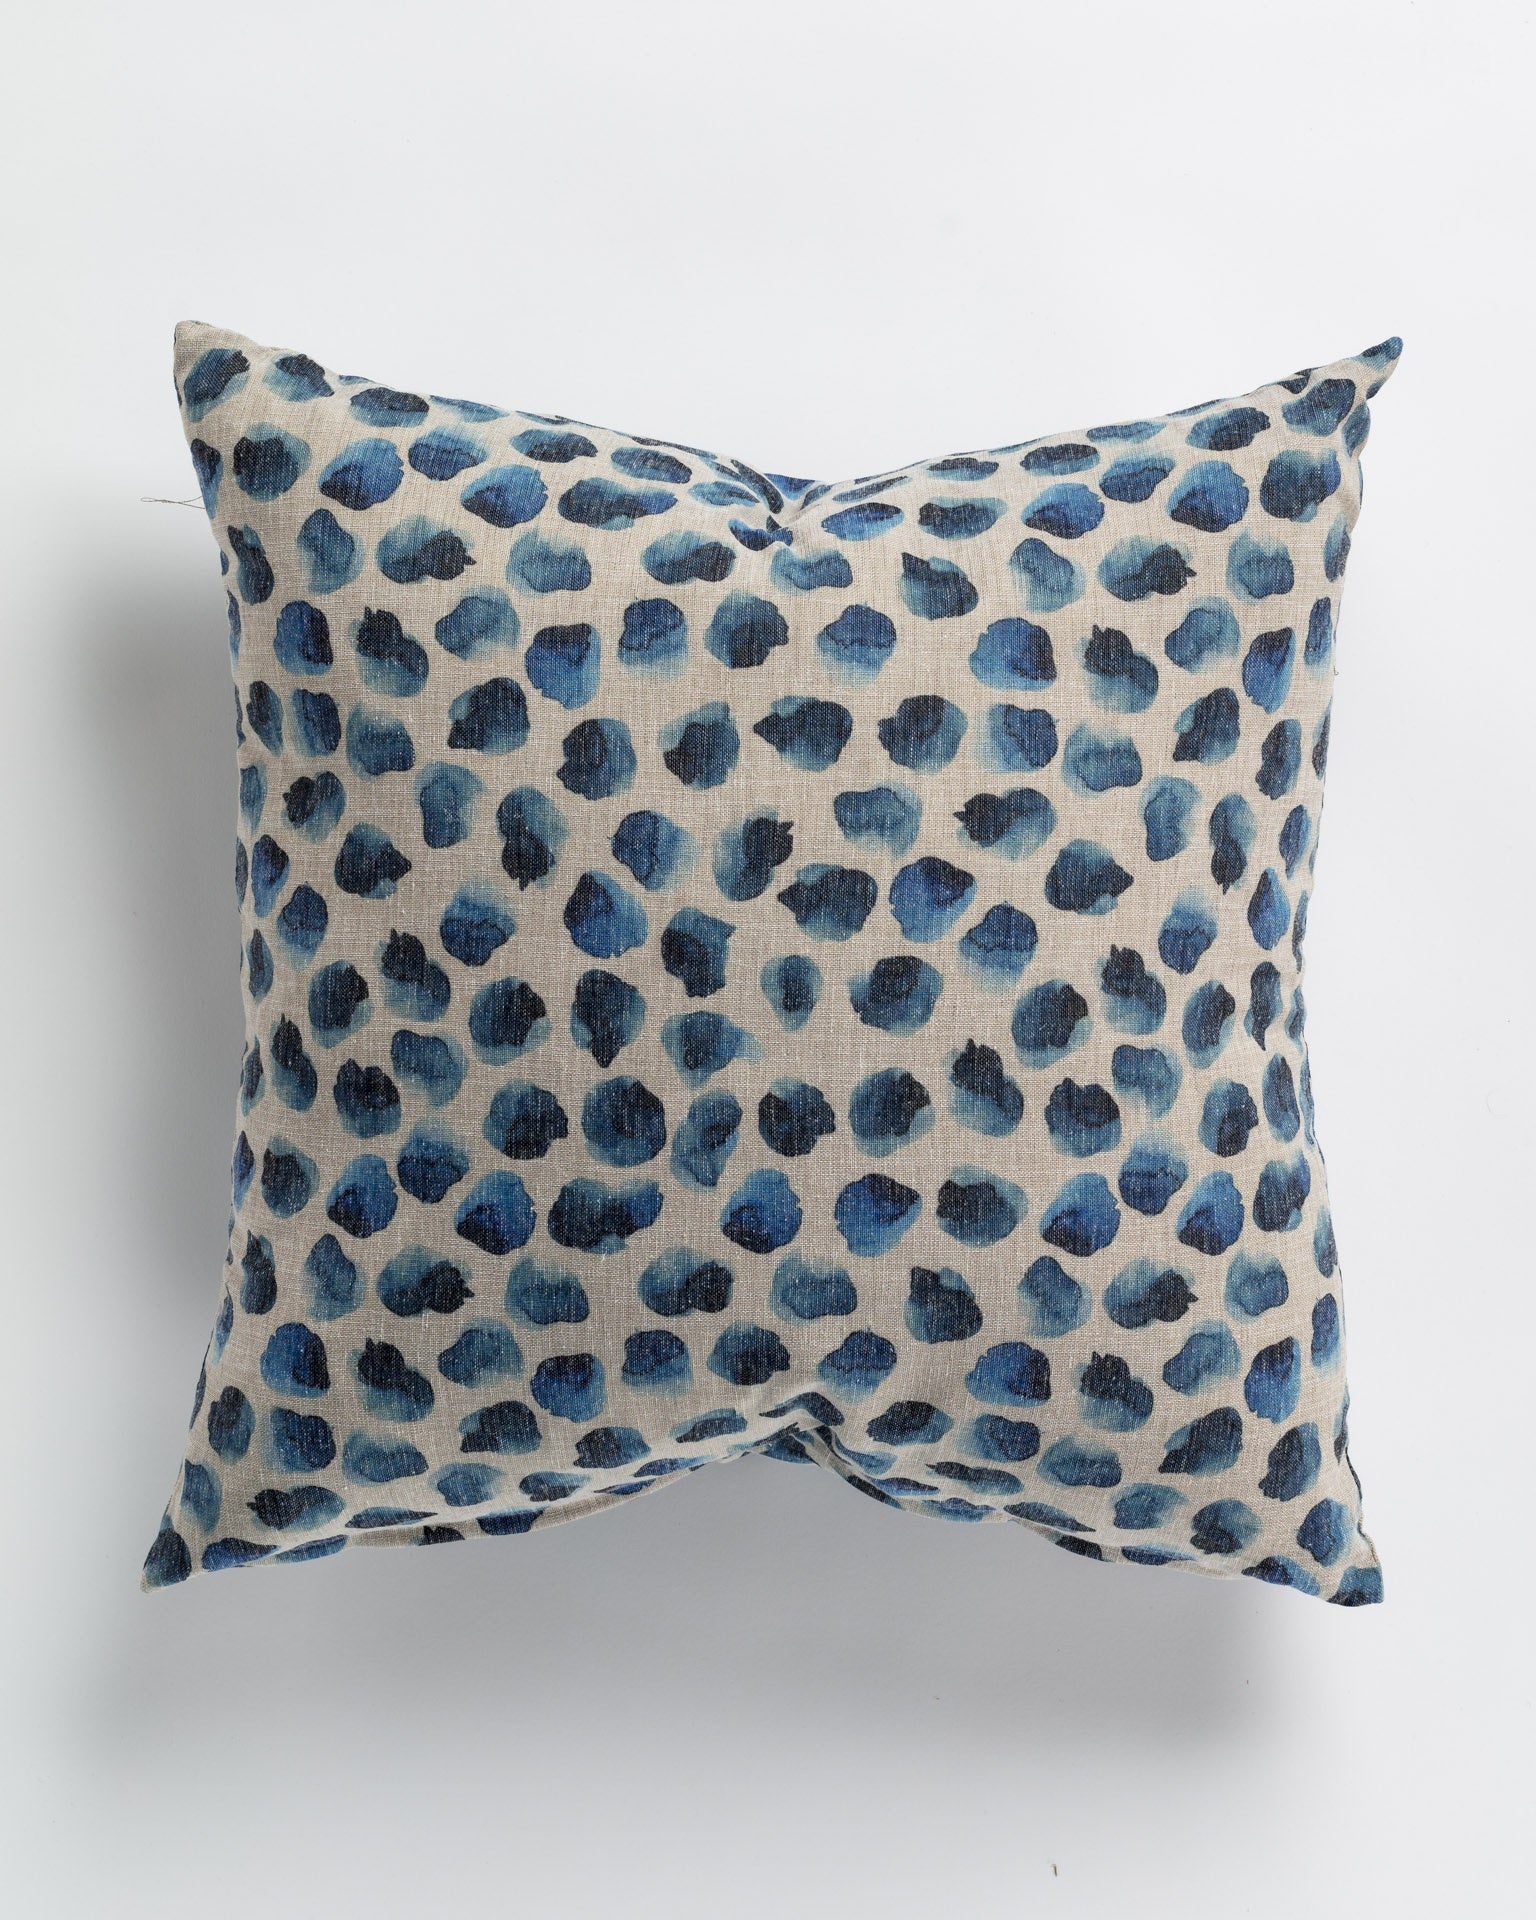 A Blurry Dot Indigo Pillow 26x26 with a pattern of blue leopard spots on a beige background, photographed against a white surface in Scottsdale Arizona by Gabby.